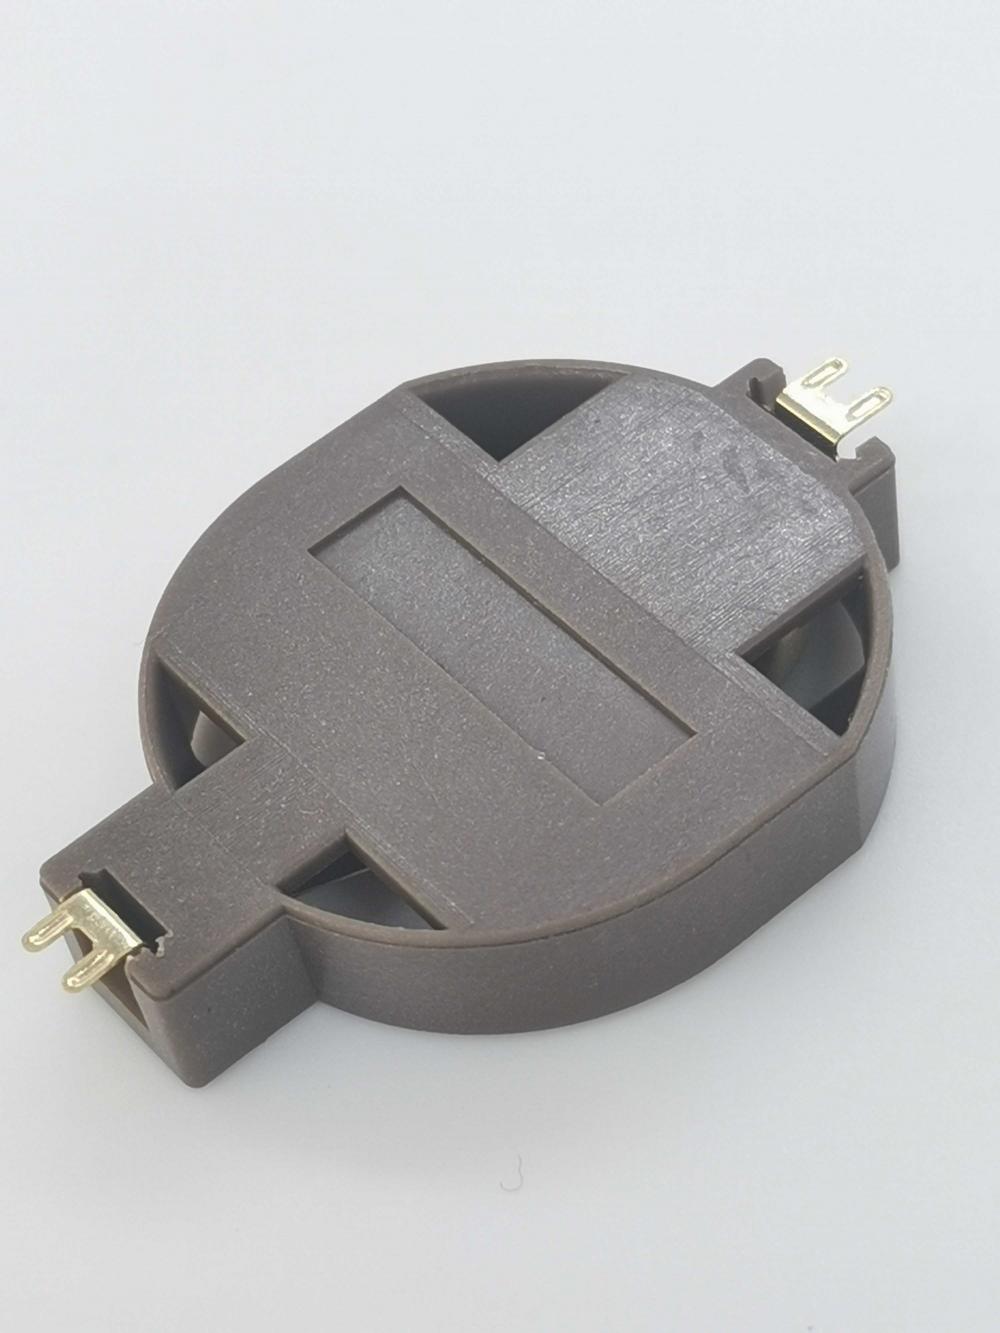 Cr2032 Surface Mount (SMT) Lithium Coin Cell Holder